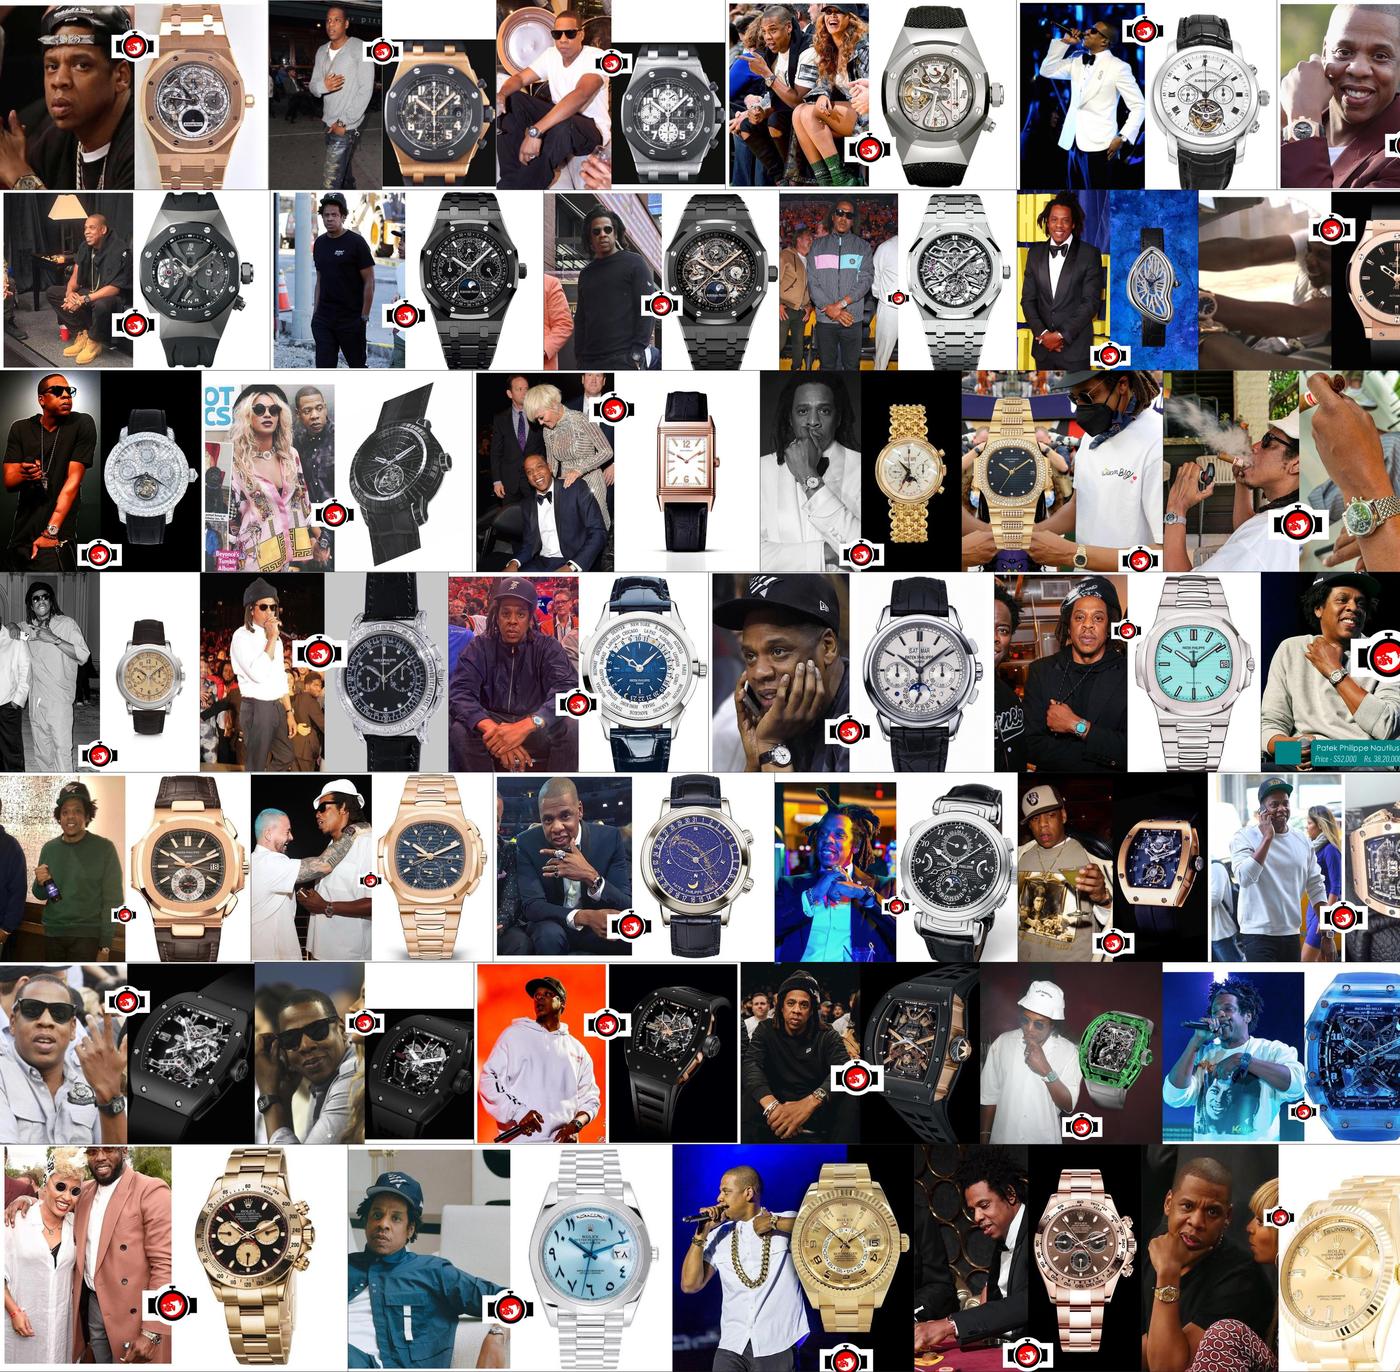 A Closer Look at Jay-Z's Exclusive Watch Collection | A Coveted Lineup of Audemars Piguet, Cartier, Hublot, and More